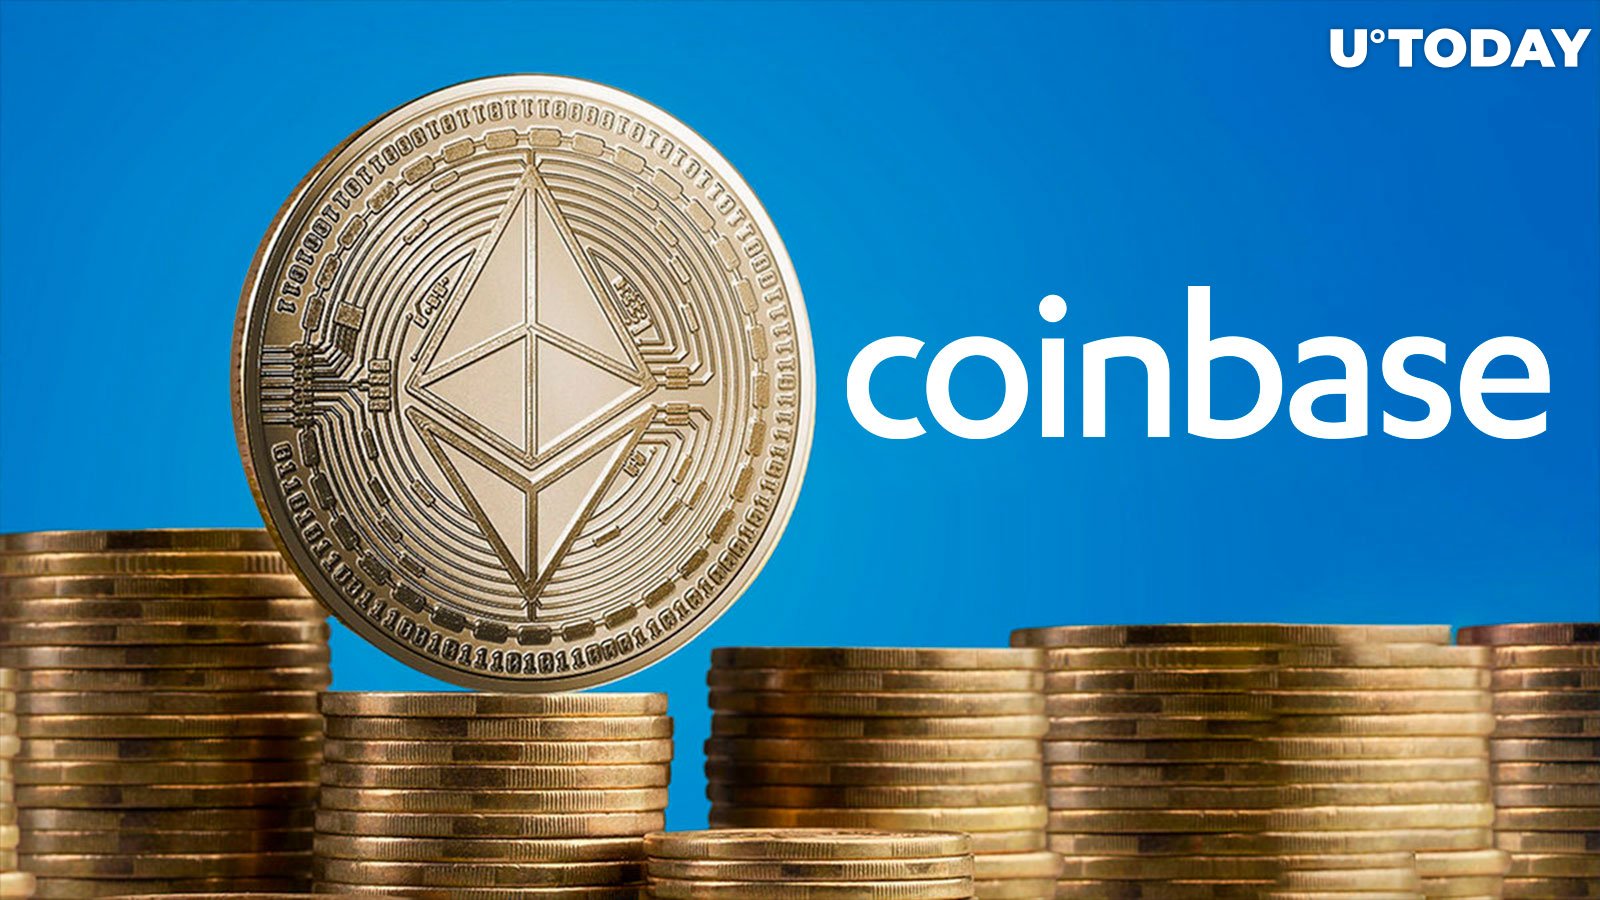 Long-Dormant Ethereum Genesis Wallet Awakens to Transfer ETH to Coinbase